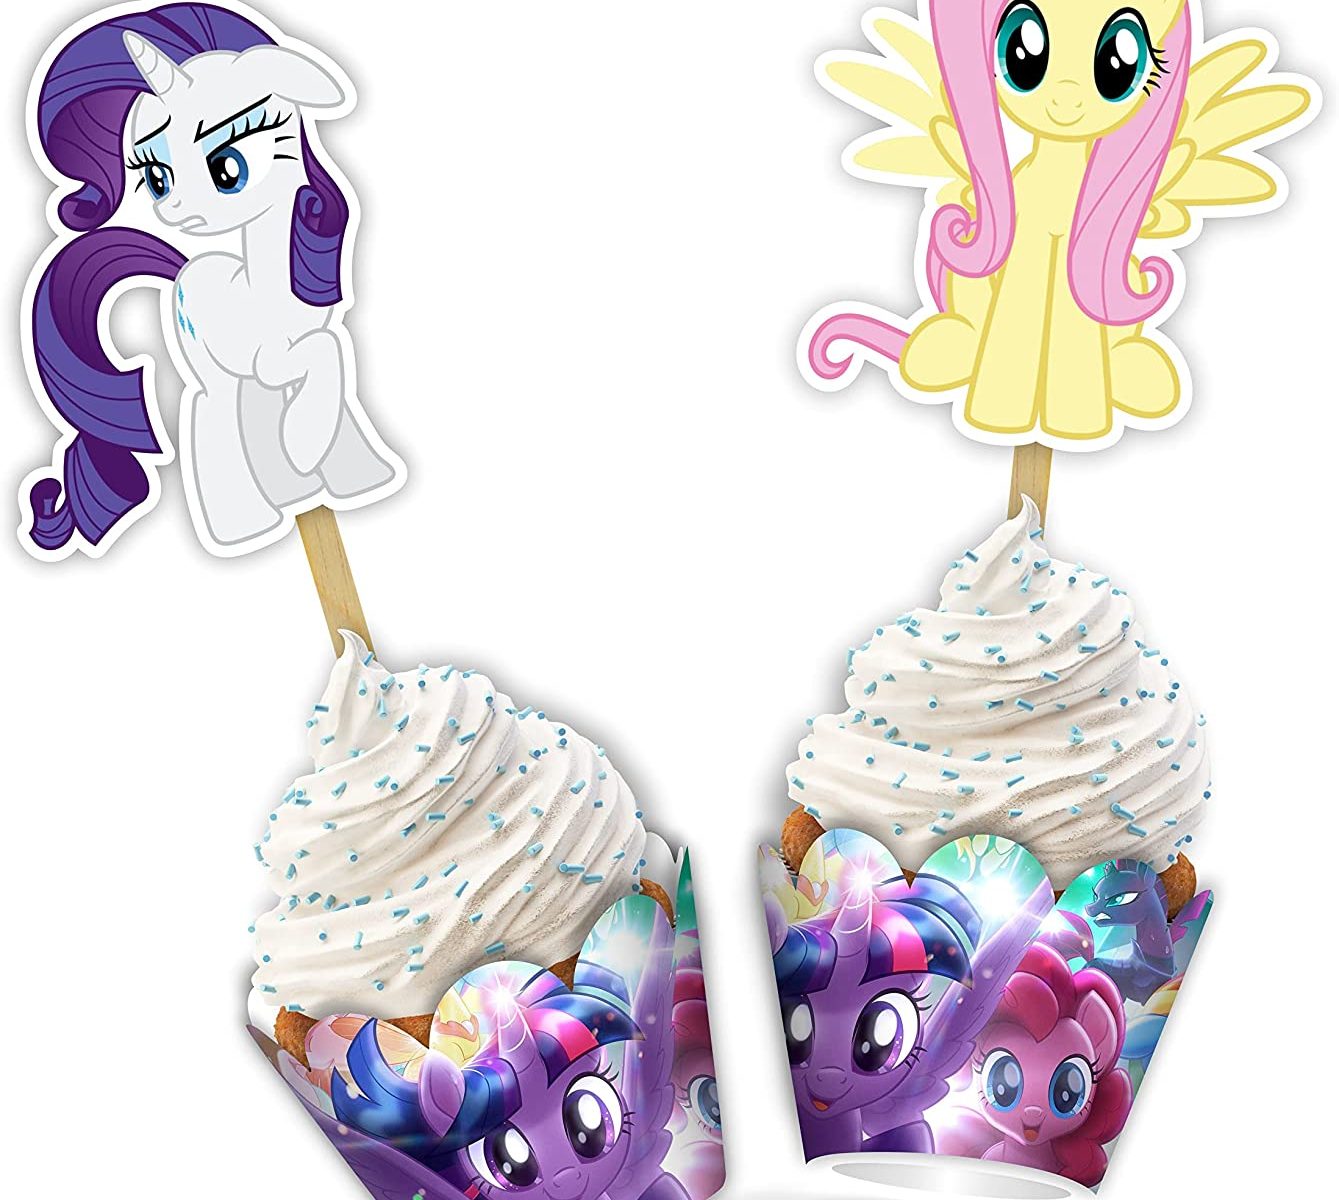 MLP Character Cupcake Wrapper Set